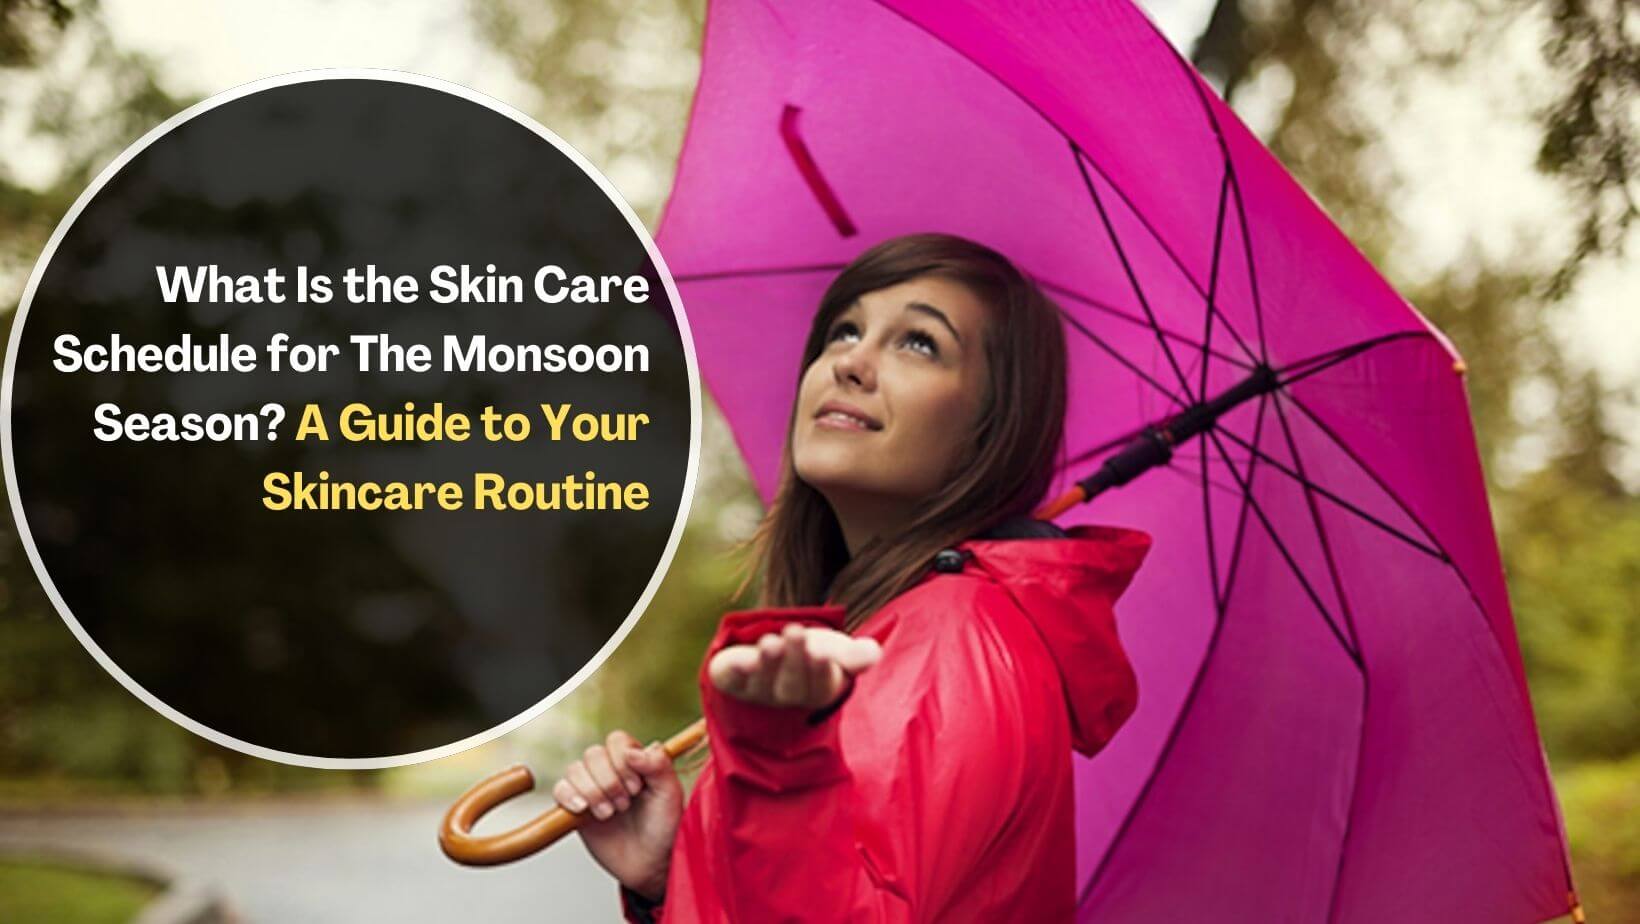 What Is the Skin Care Schedule for The Monsoon Season?